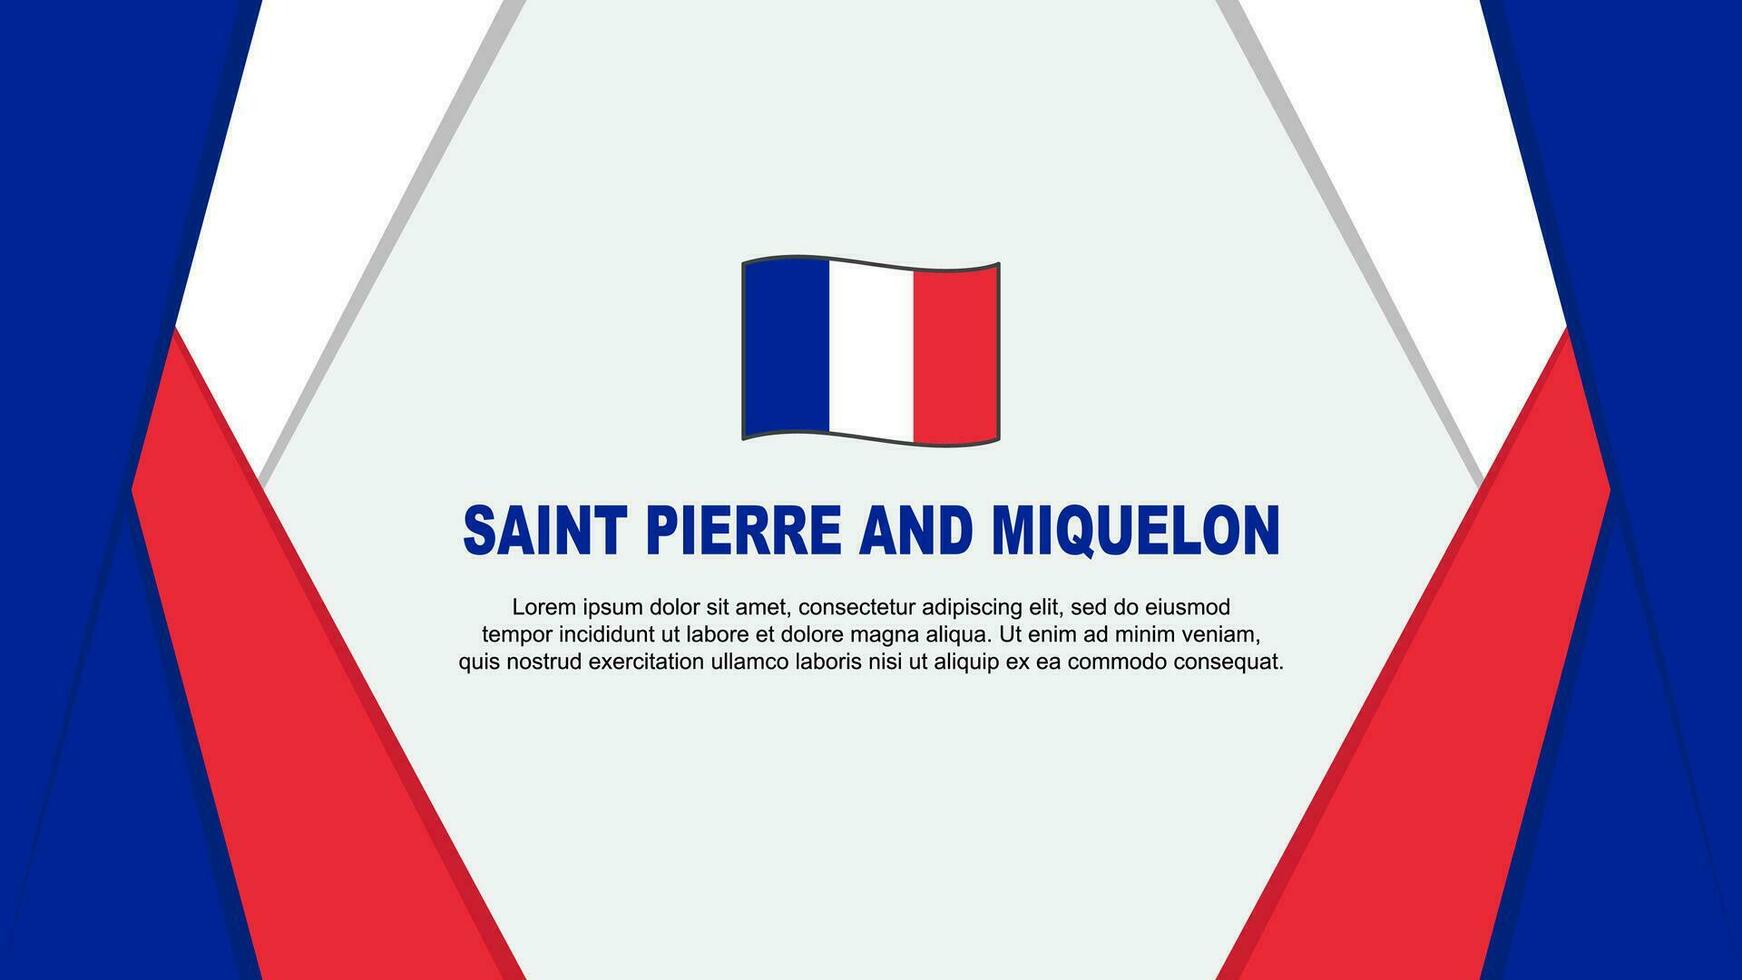 Saint Pierre And Miquelon Flag Abstract Background Design Template. Saint Pierre And Miquelon Independence Day Banner Vector Illustration. Background